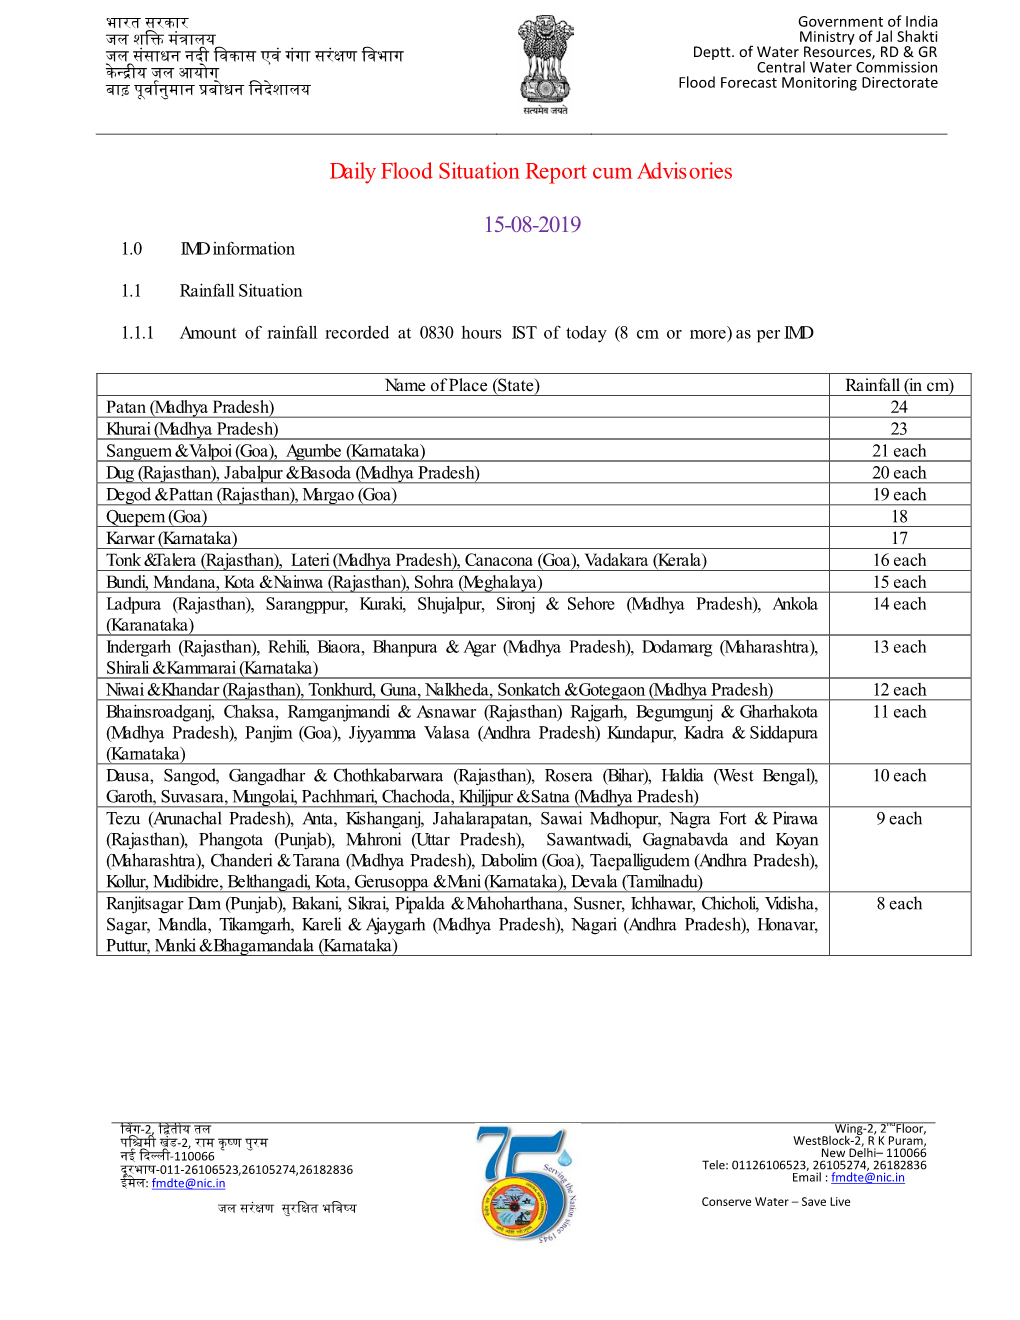 Daily Flood Situation Report Cum Advisories 15-08-2019